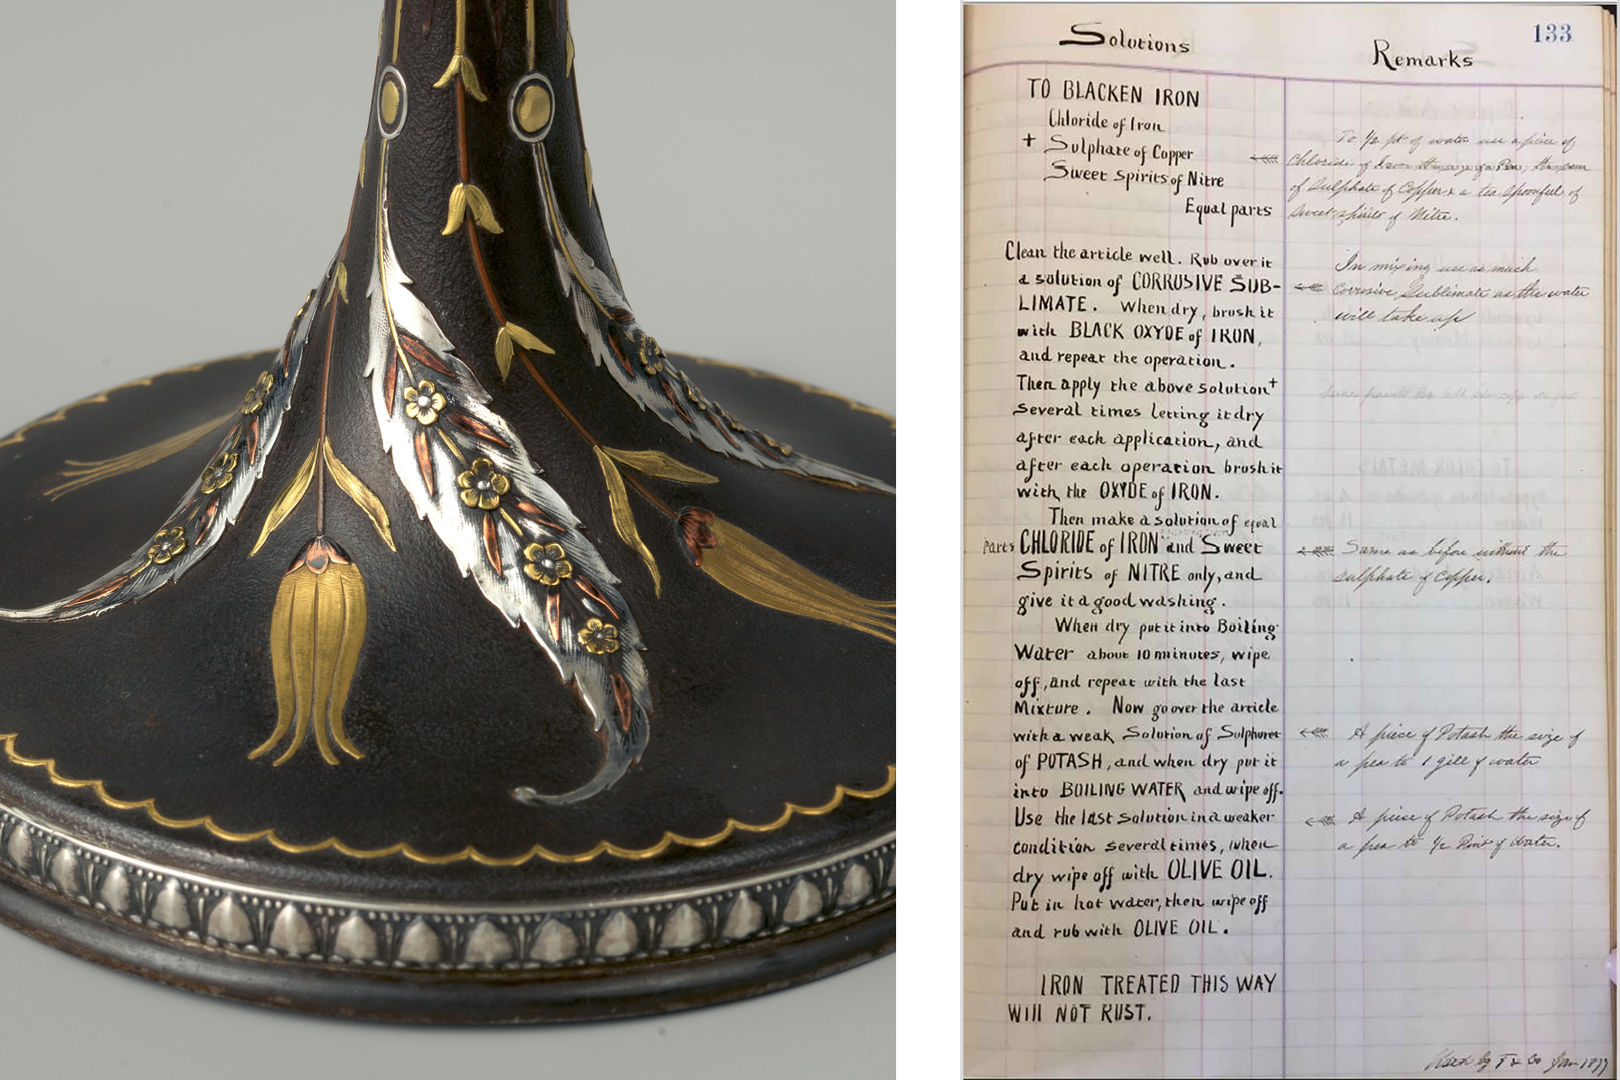 Composite image of a black iron candlestick base and a handwritten document with instructions for how to blacken iron. The candle base is adorned with floral designs modeled in low relief on the surface and surfaced in a variety of silver-, gold-, and copper-toned metals.